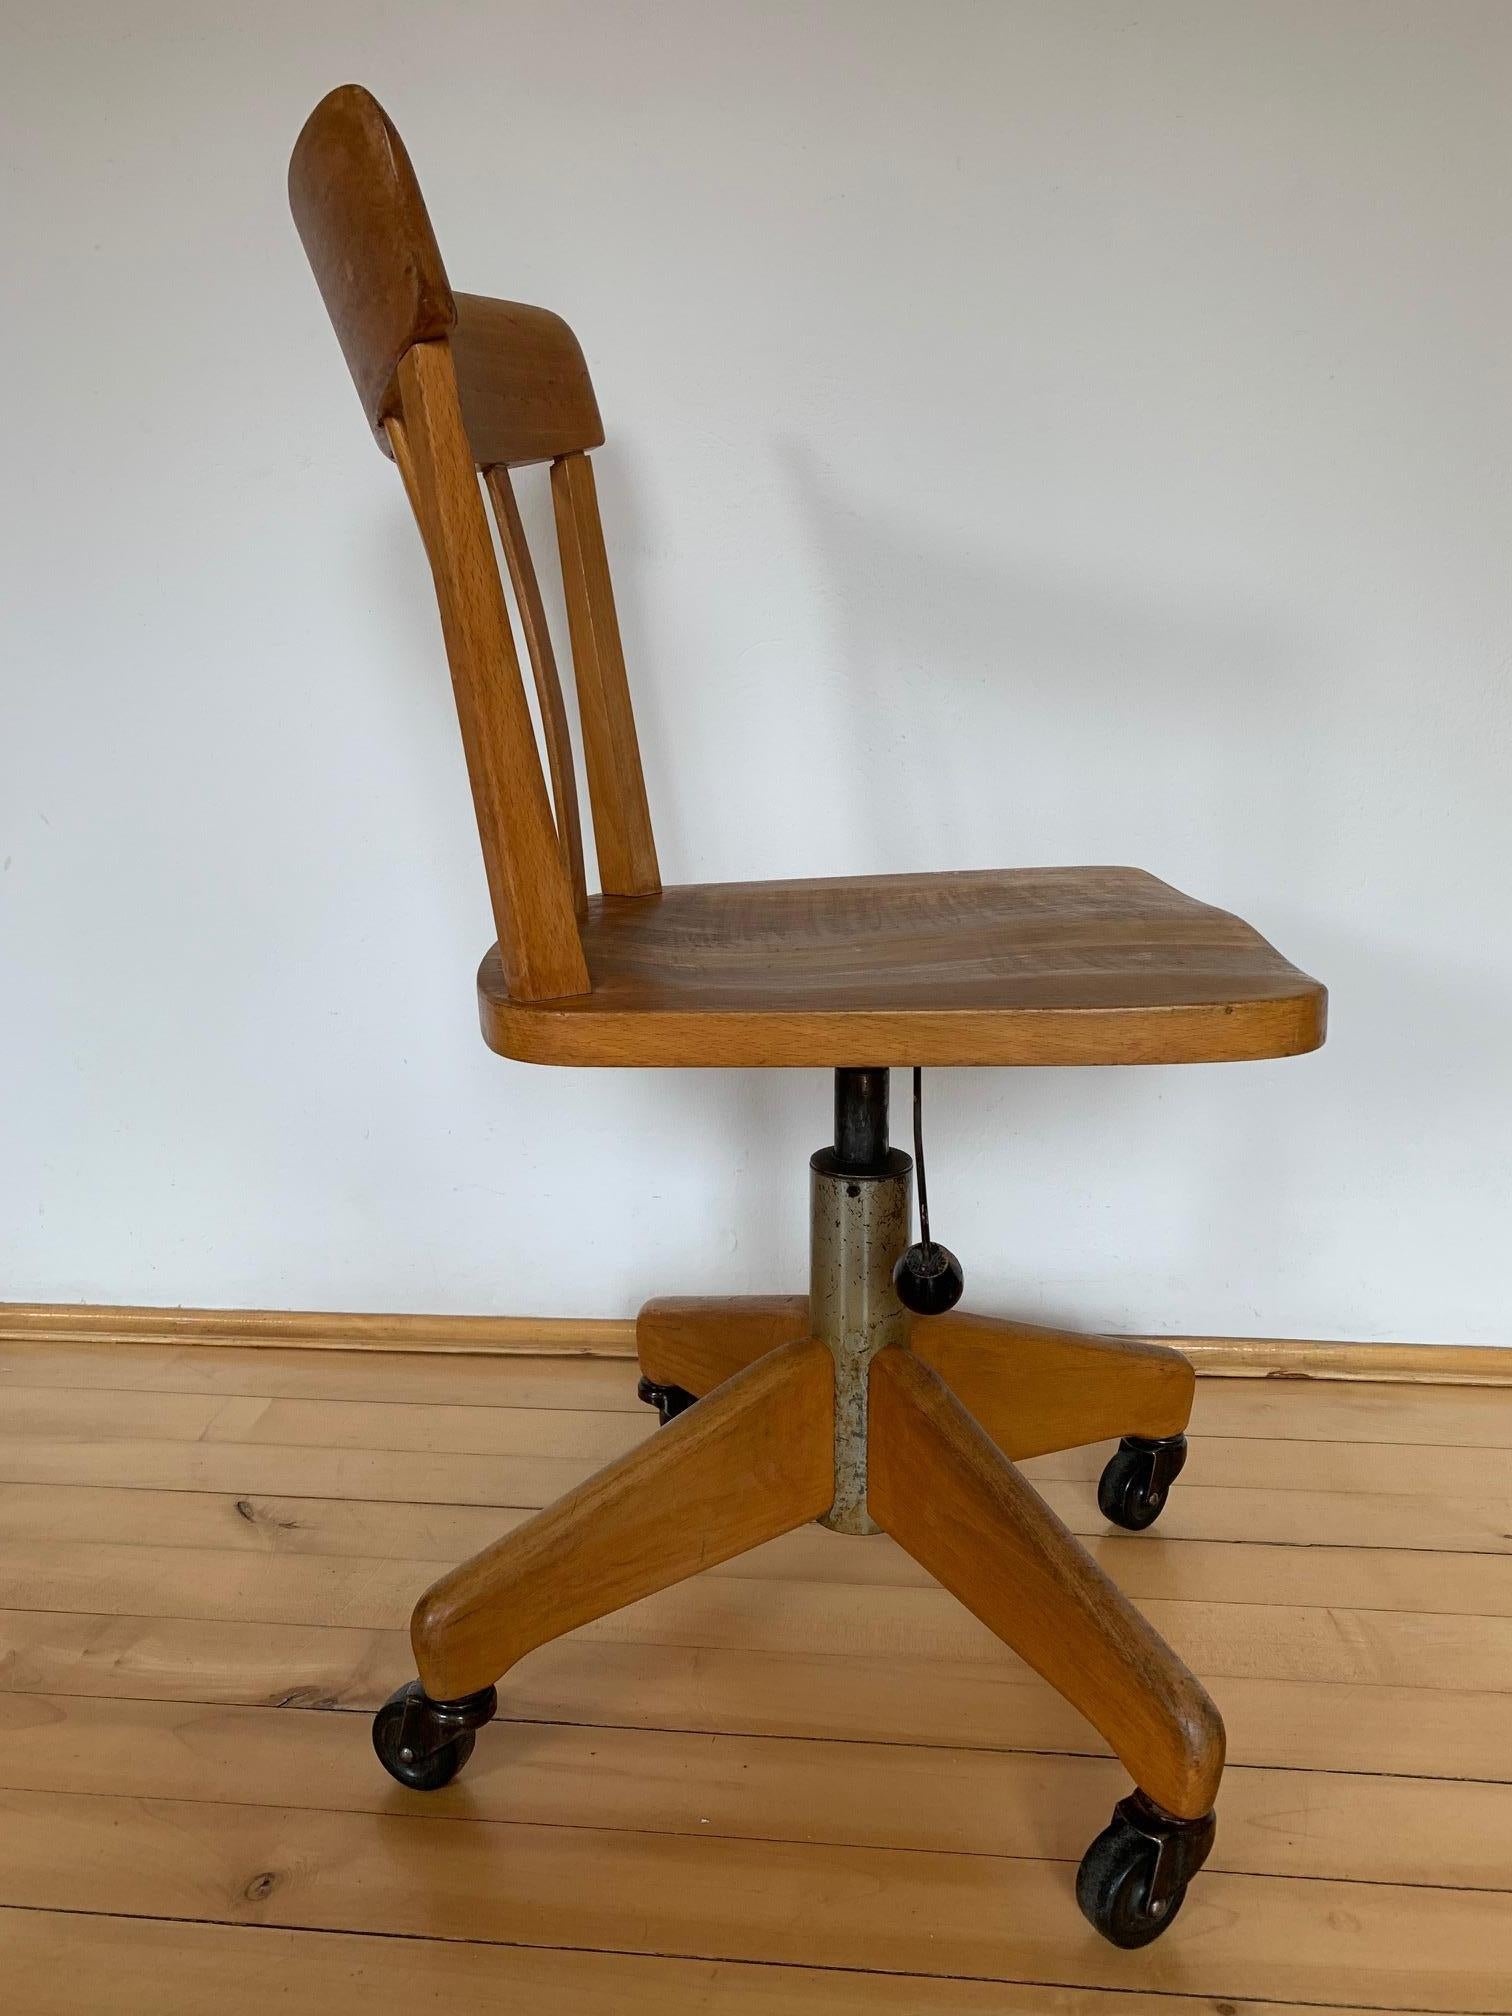 Armchair Stoll Giroflex, Switzerland from the 1960s fully original, signed, without renovation. A classic, timeless form.